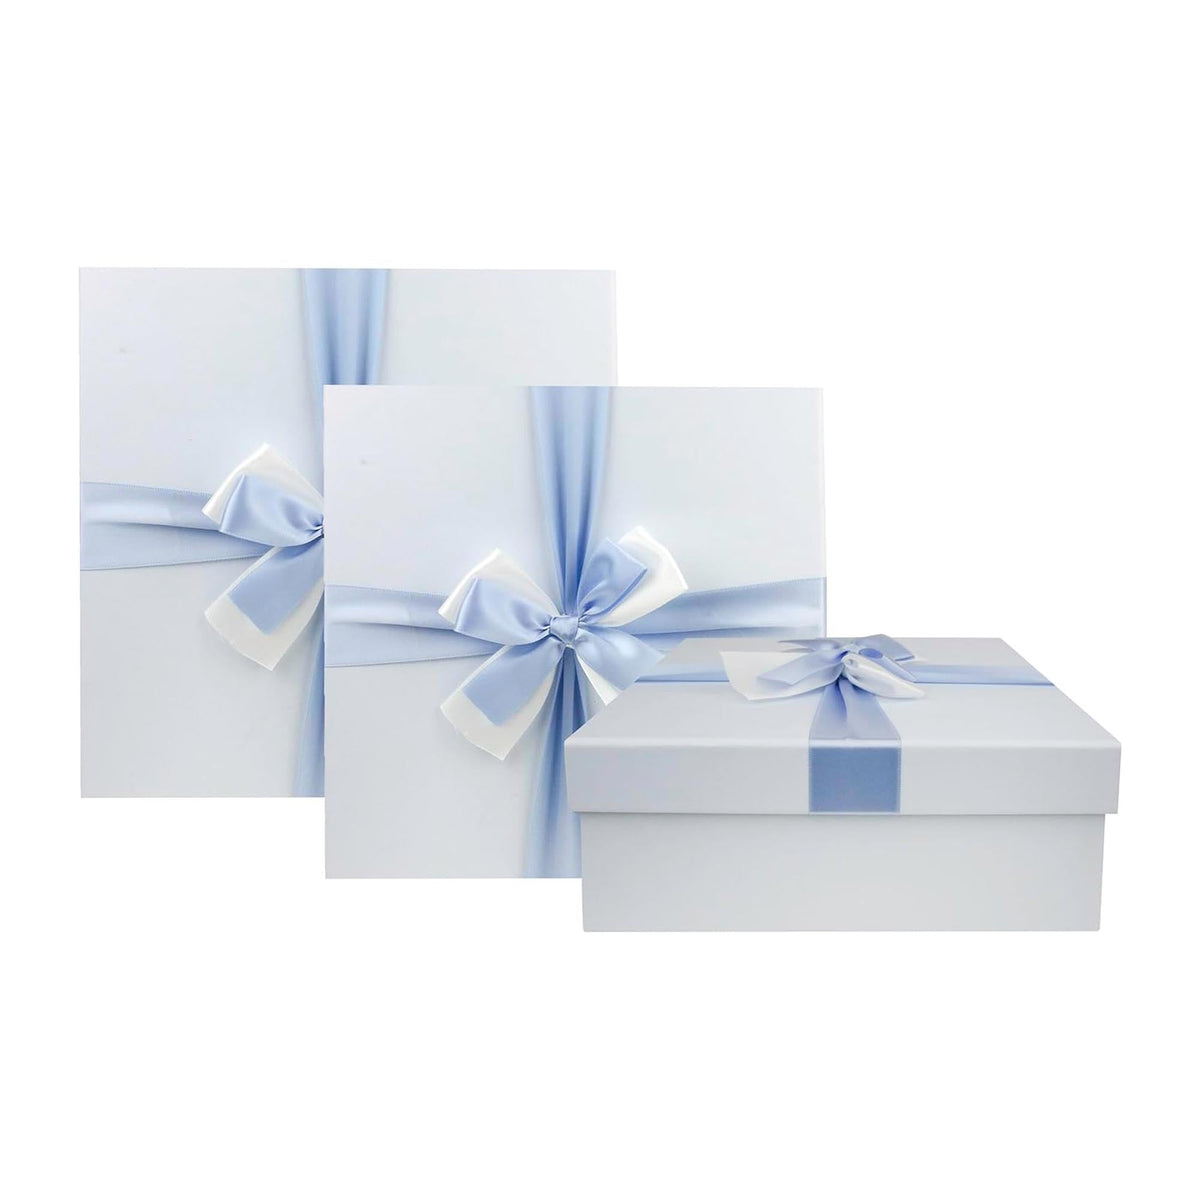 Set of 3 Baby Blue Gift Boxes With Blue Satin Ribbon (Sizes Available)